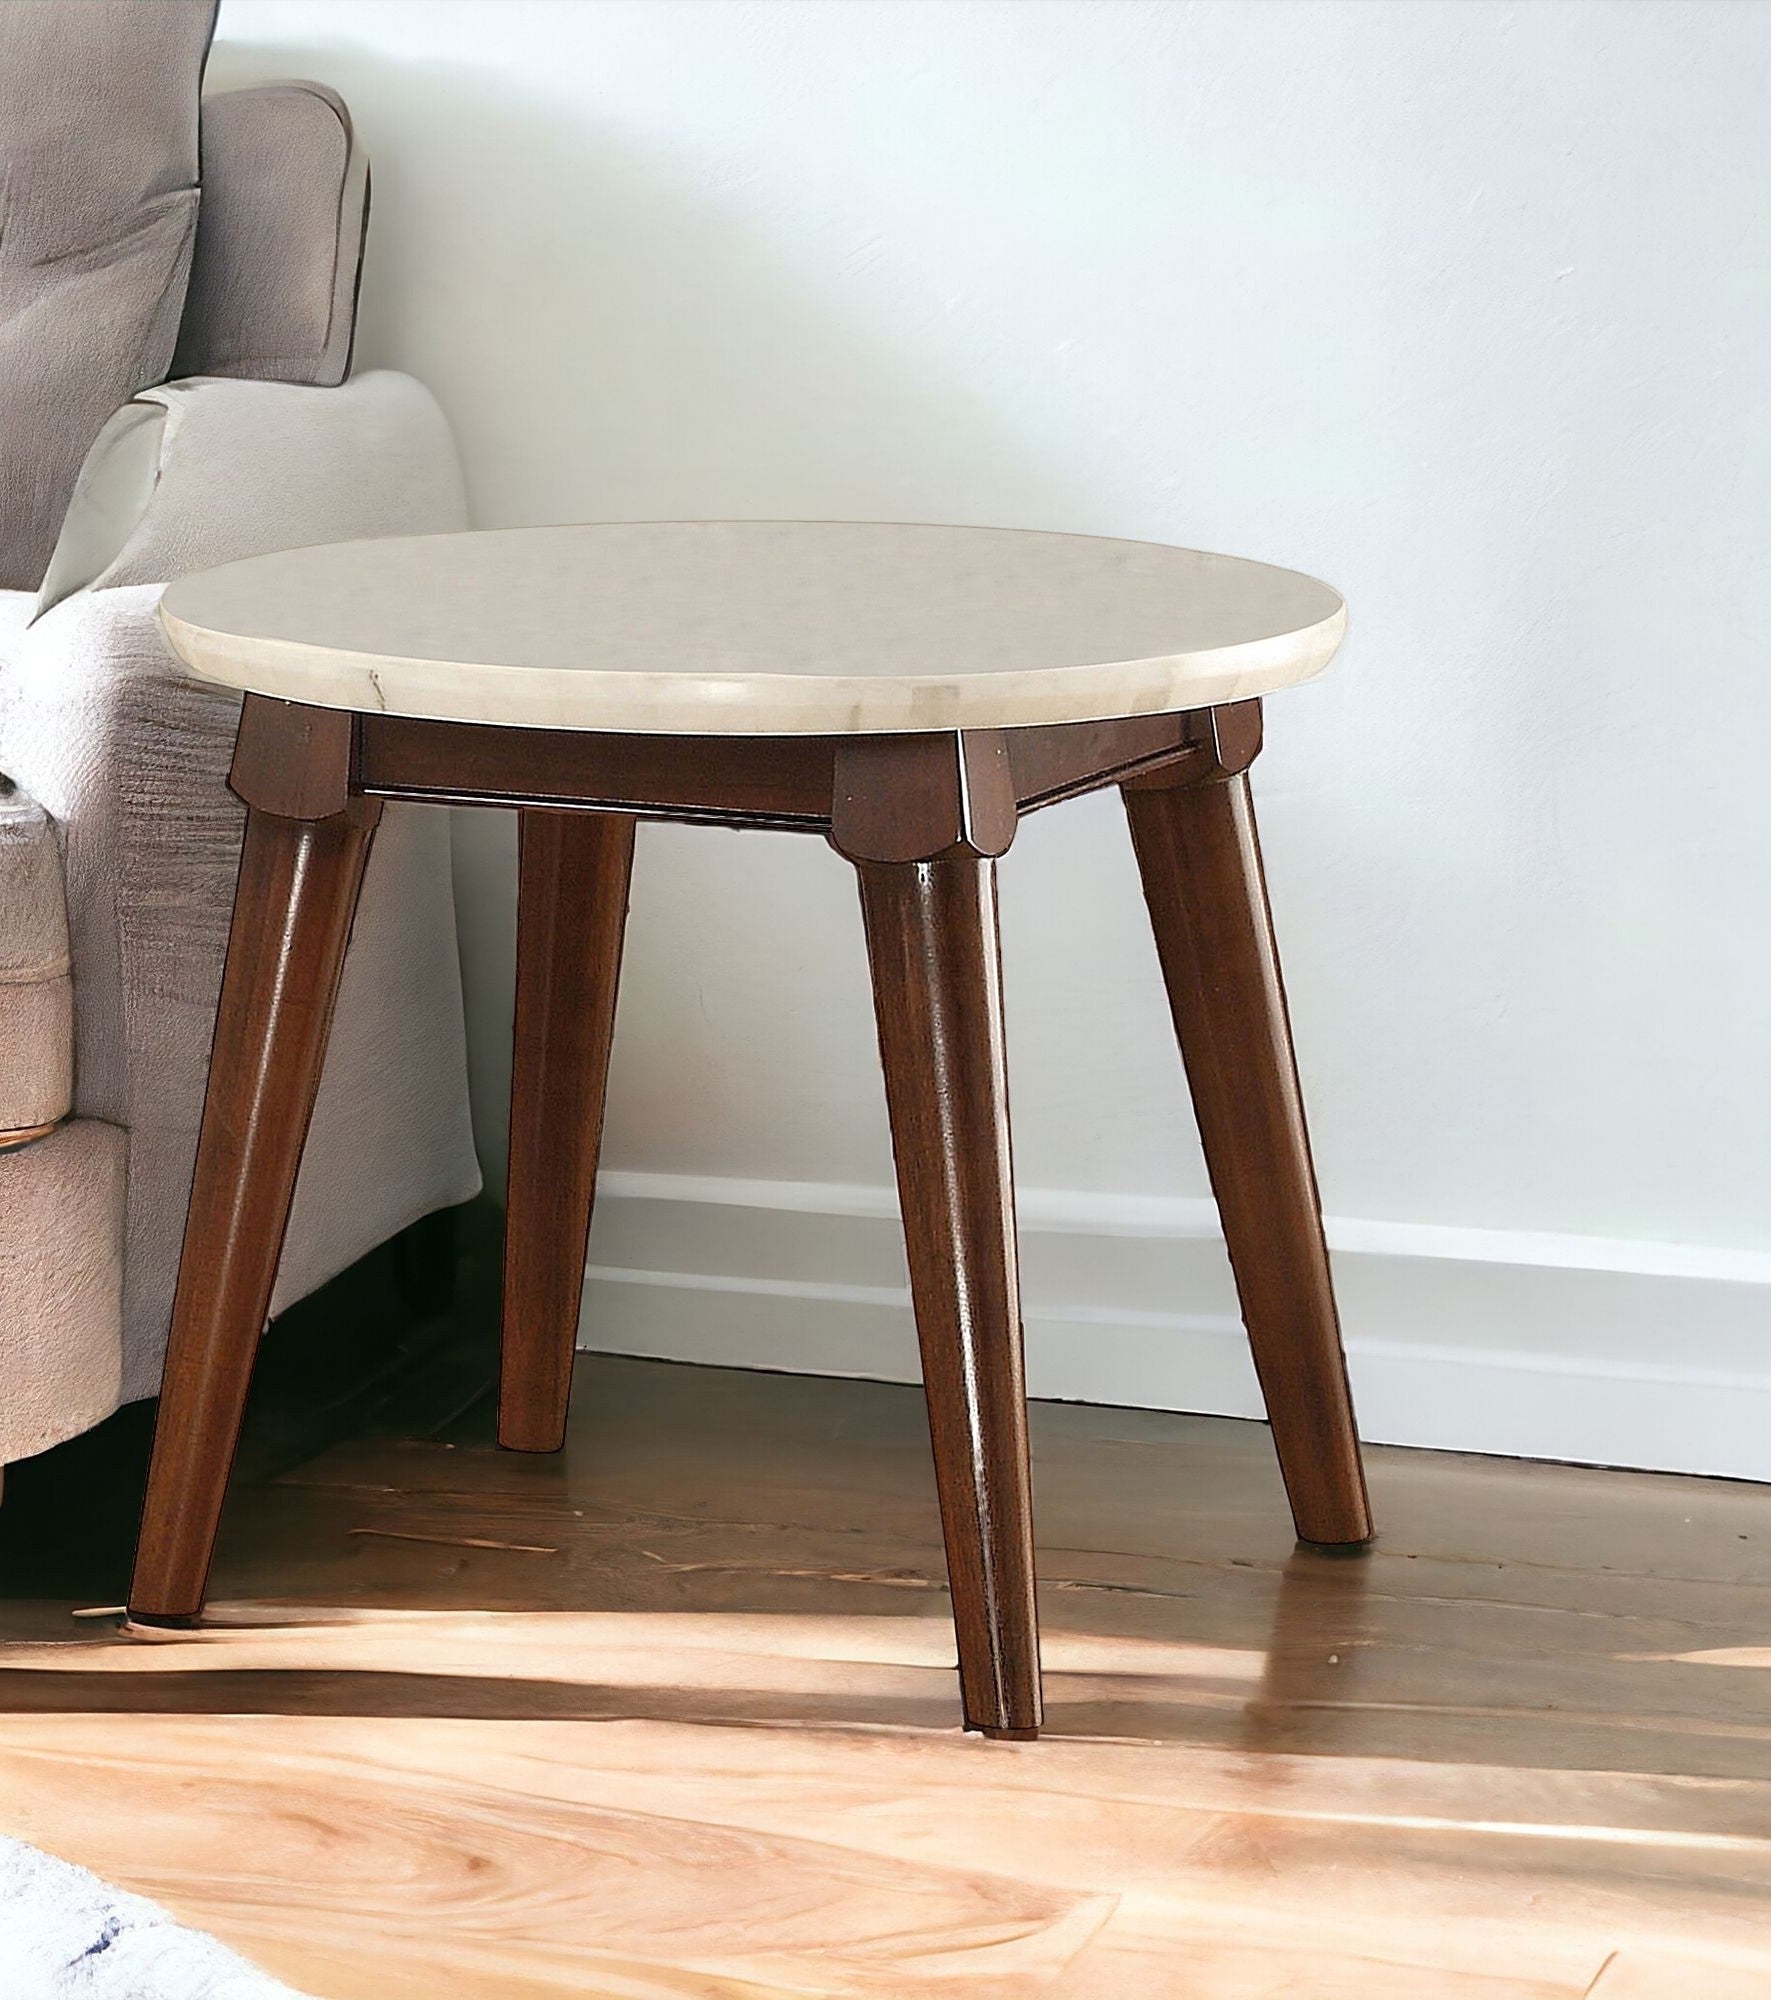 22" Walnut And White Faux Marble Round End Table